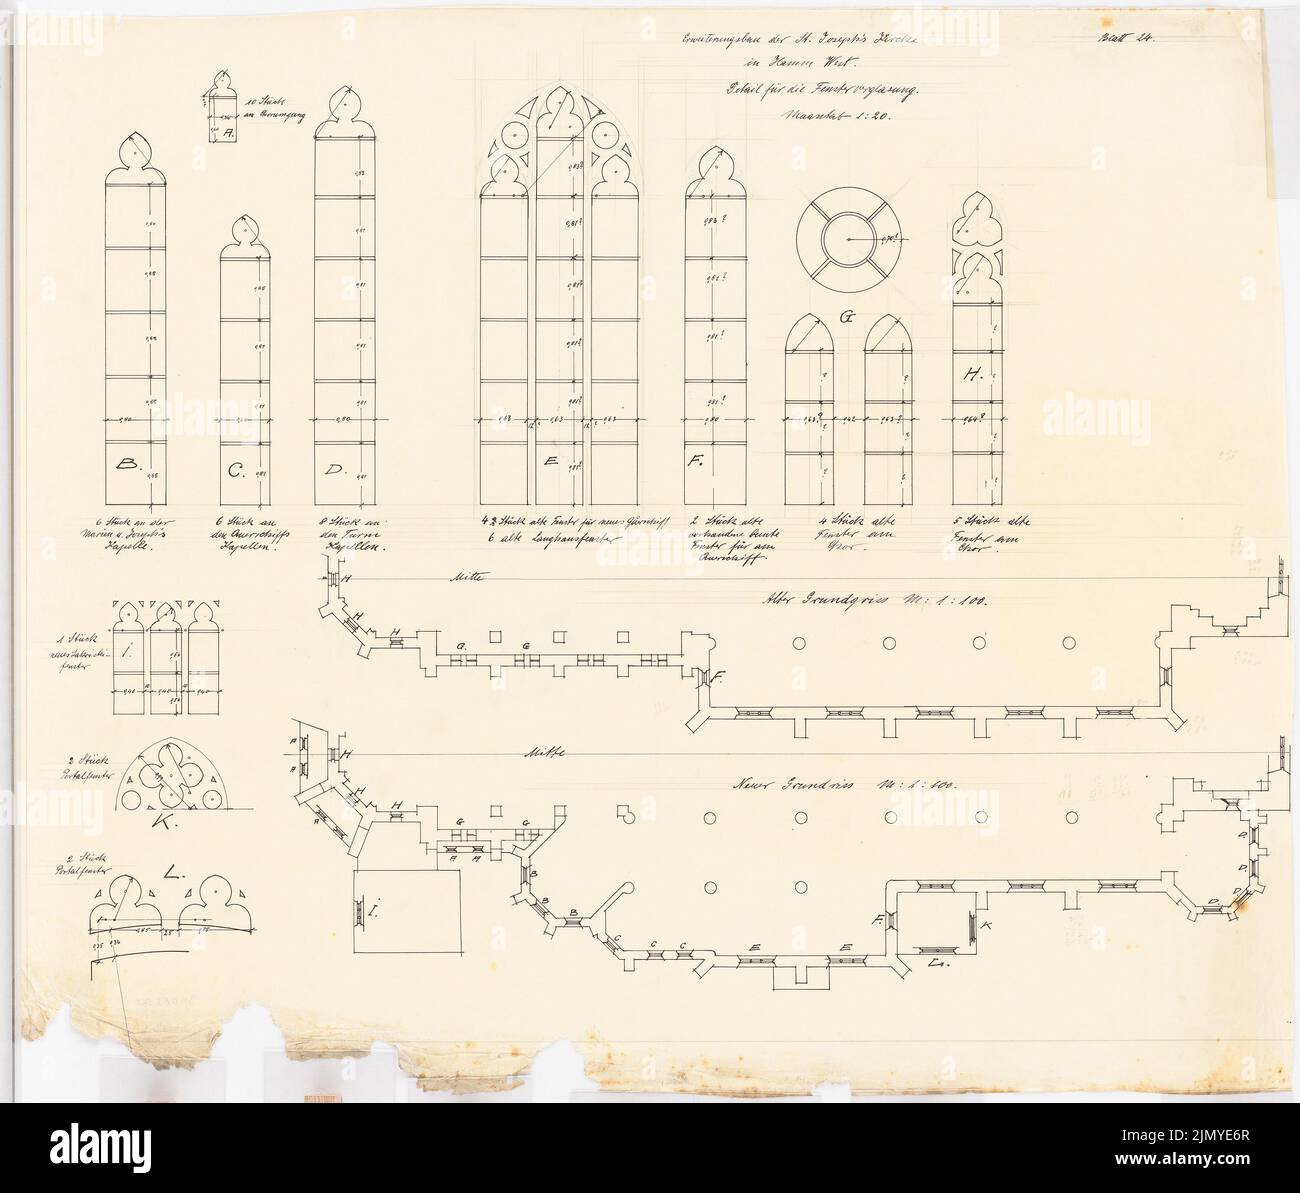 Klomp Johannes Franziskus (1865-1946), expansion of the St. Joseph Church, Hamm (1907-1910): Details for window glazing 1:20, age and new floor plan (excerpts) 1: 100. Ink on transparent, 72.8 x 85.8 cm (including scan edges) Stock Photo